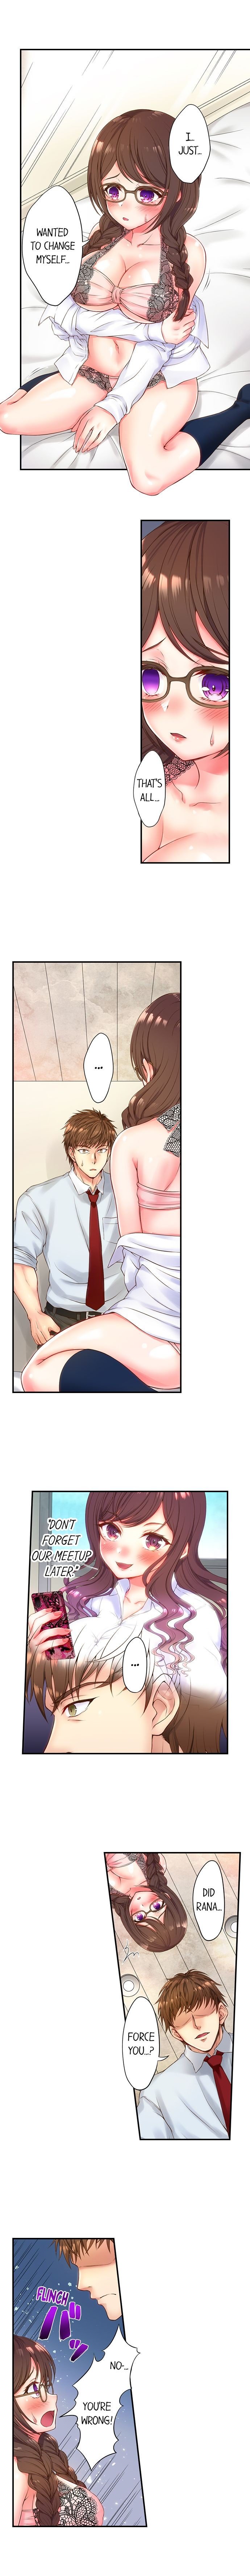 a-rebellious-girls-sexual-instruction-by-her-teacher-2-chap-8-2